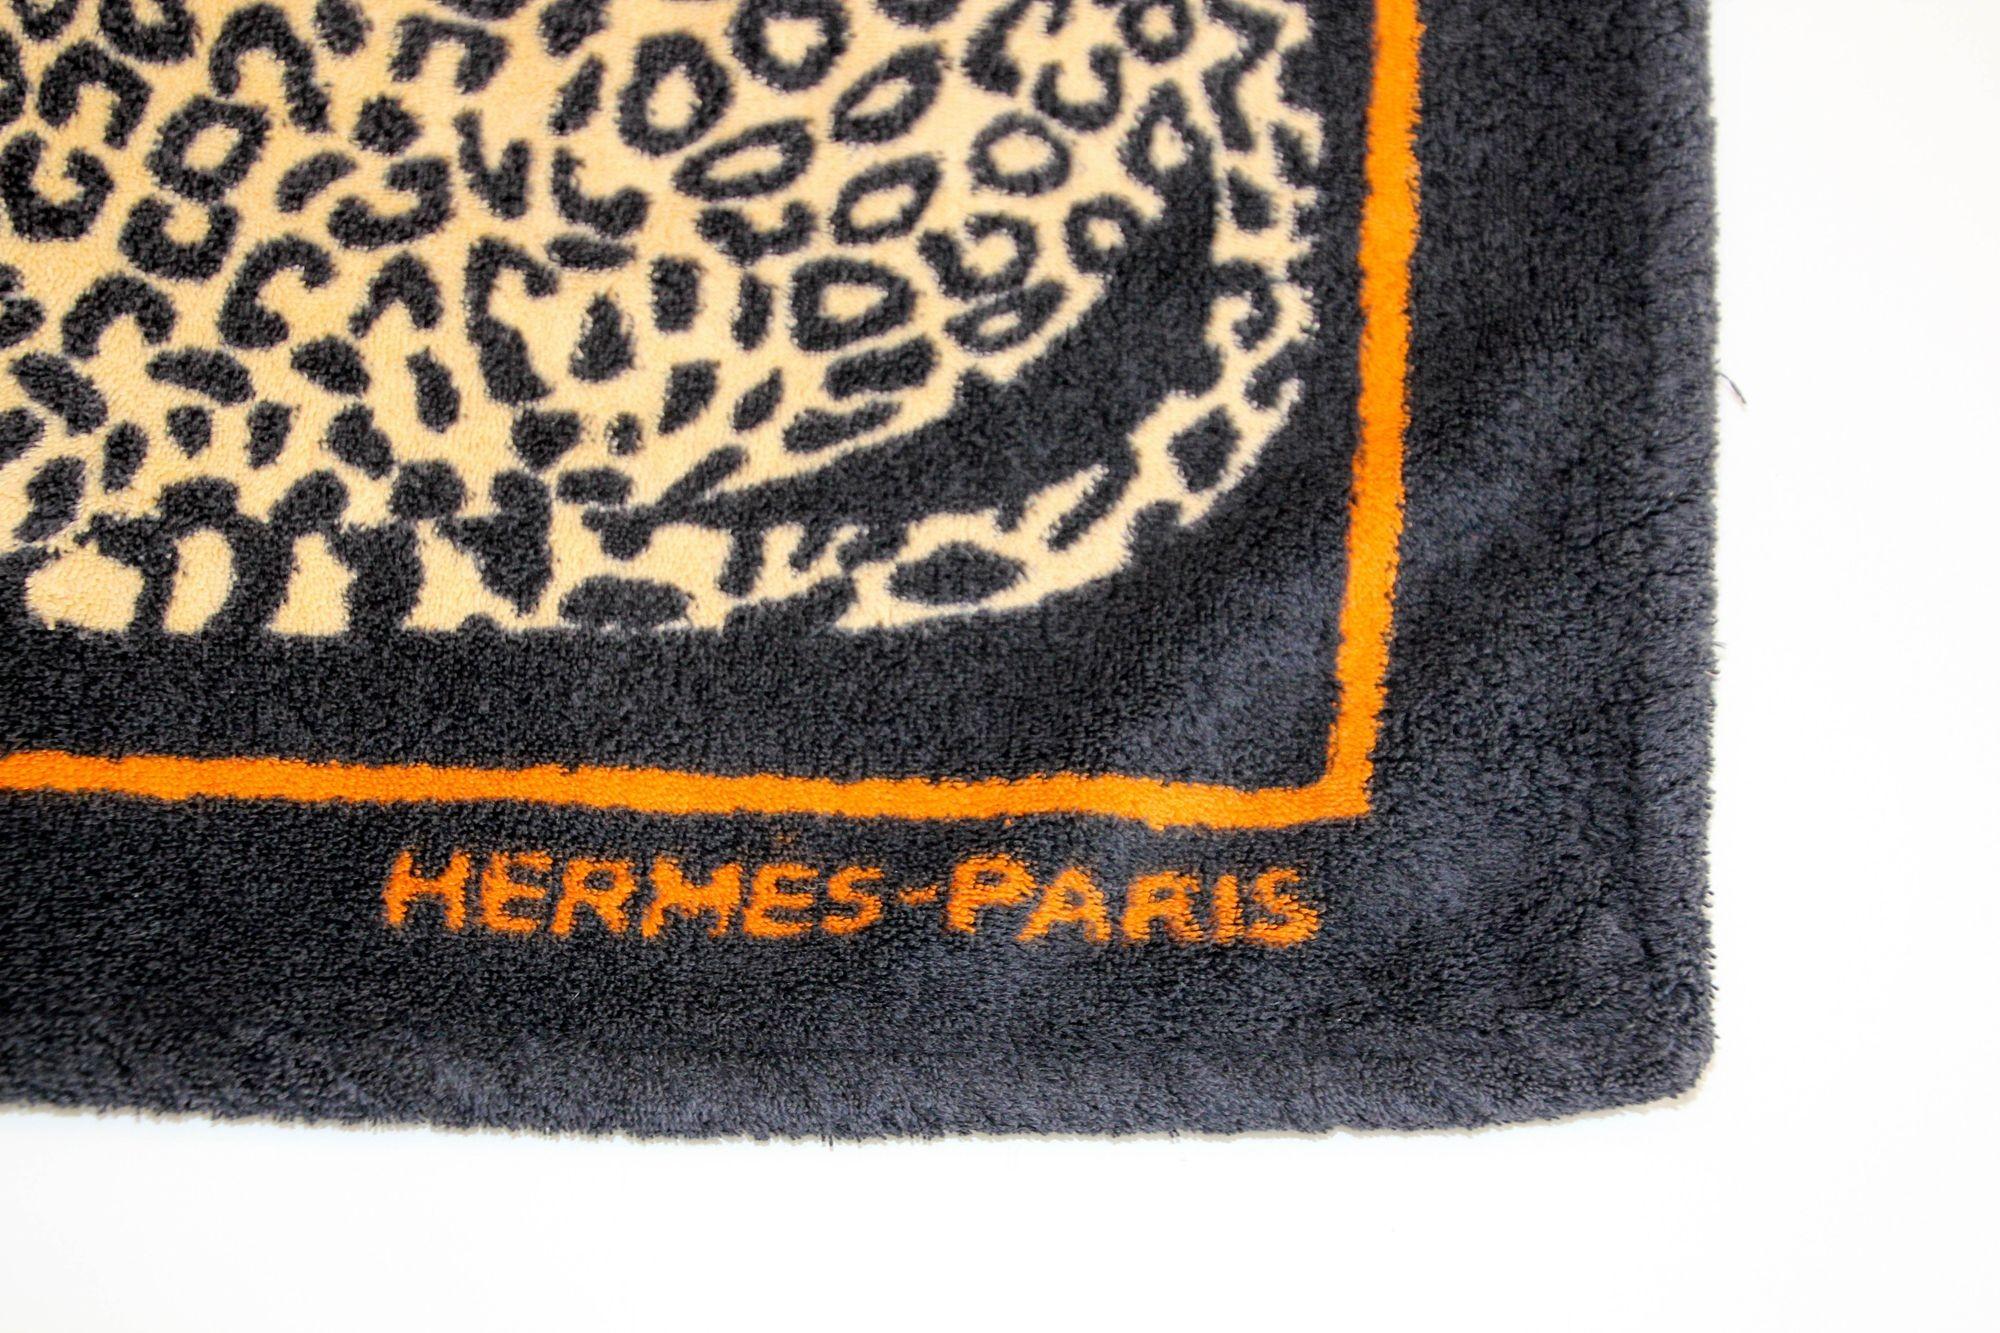 Hermes Paris Small Bath Mat with a Leopard Print in Black and Orange 2